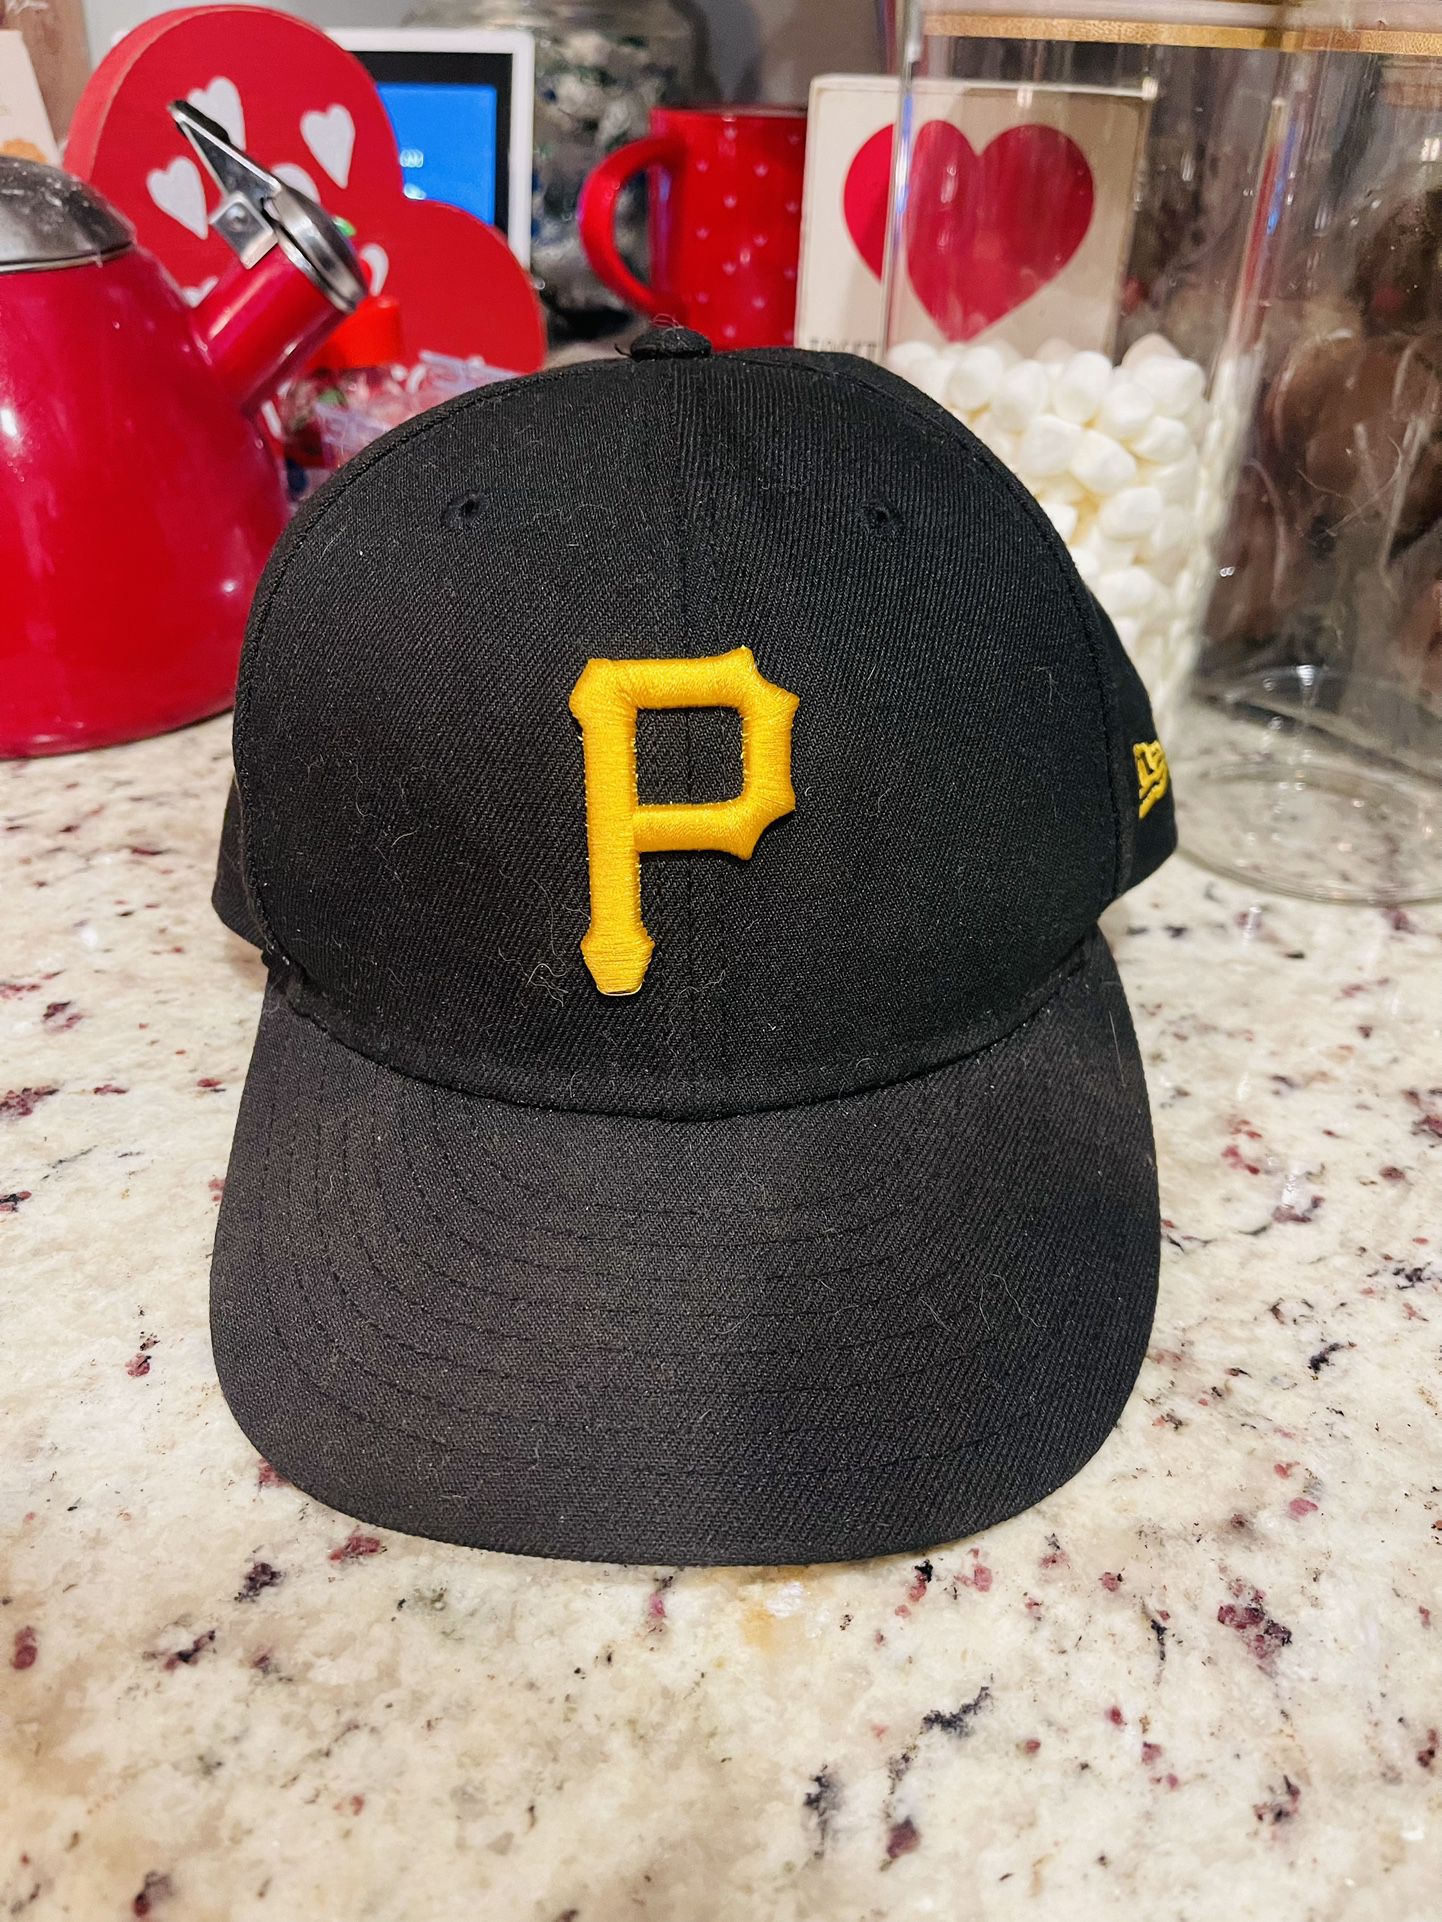 New Era 7 1/8 Pirates Hat Fitted. PLEASE PICK UP TODAY